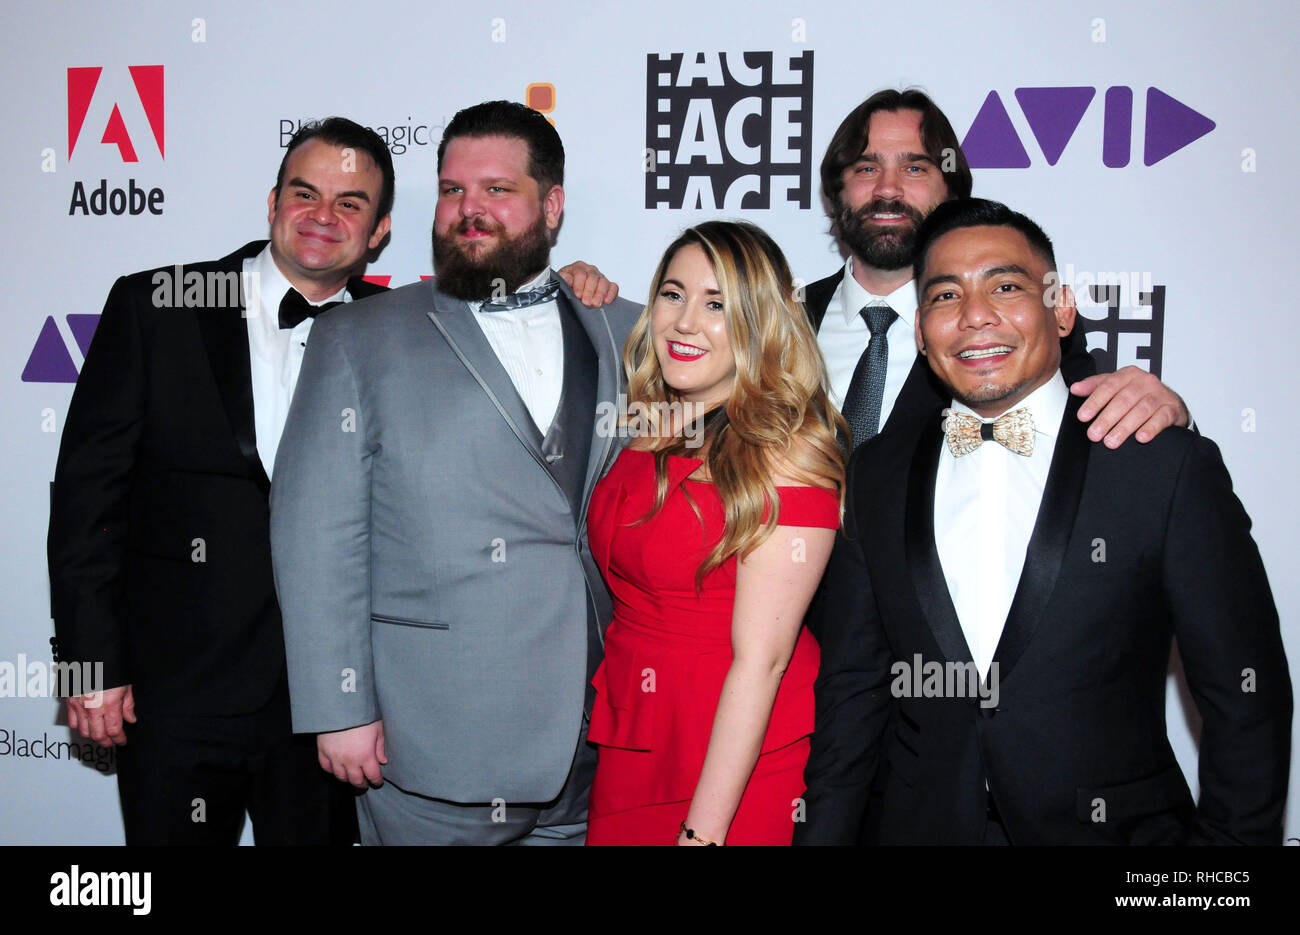 BEVERLY HILLS, CA - FEBRUARY 1: Editors Alexandra Moore, Rob Butler and Ben Bulatao and guests attend ACE 69th Annual Eddie Awards on February 1, 2019 at the Beverly Hilton Hotel in Beverly Hills, California. Photo by Barry King/Alamy Stock Photo Stock Photo